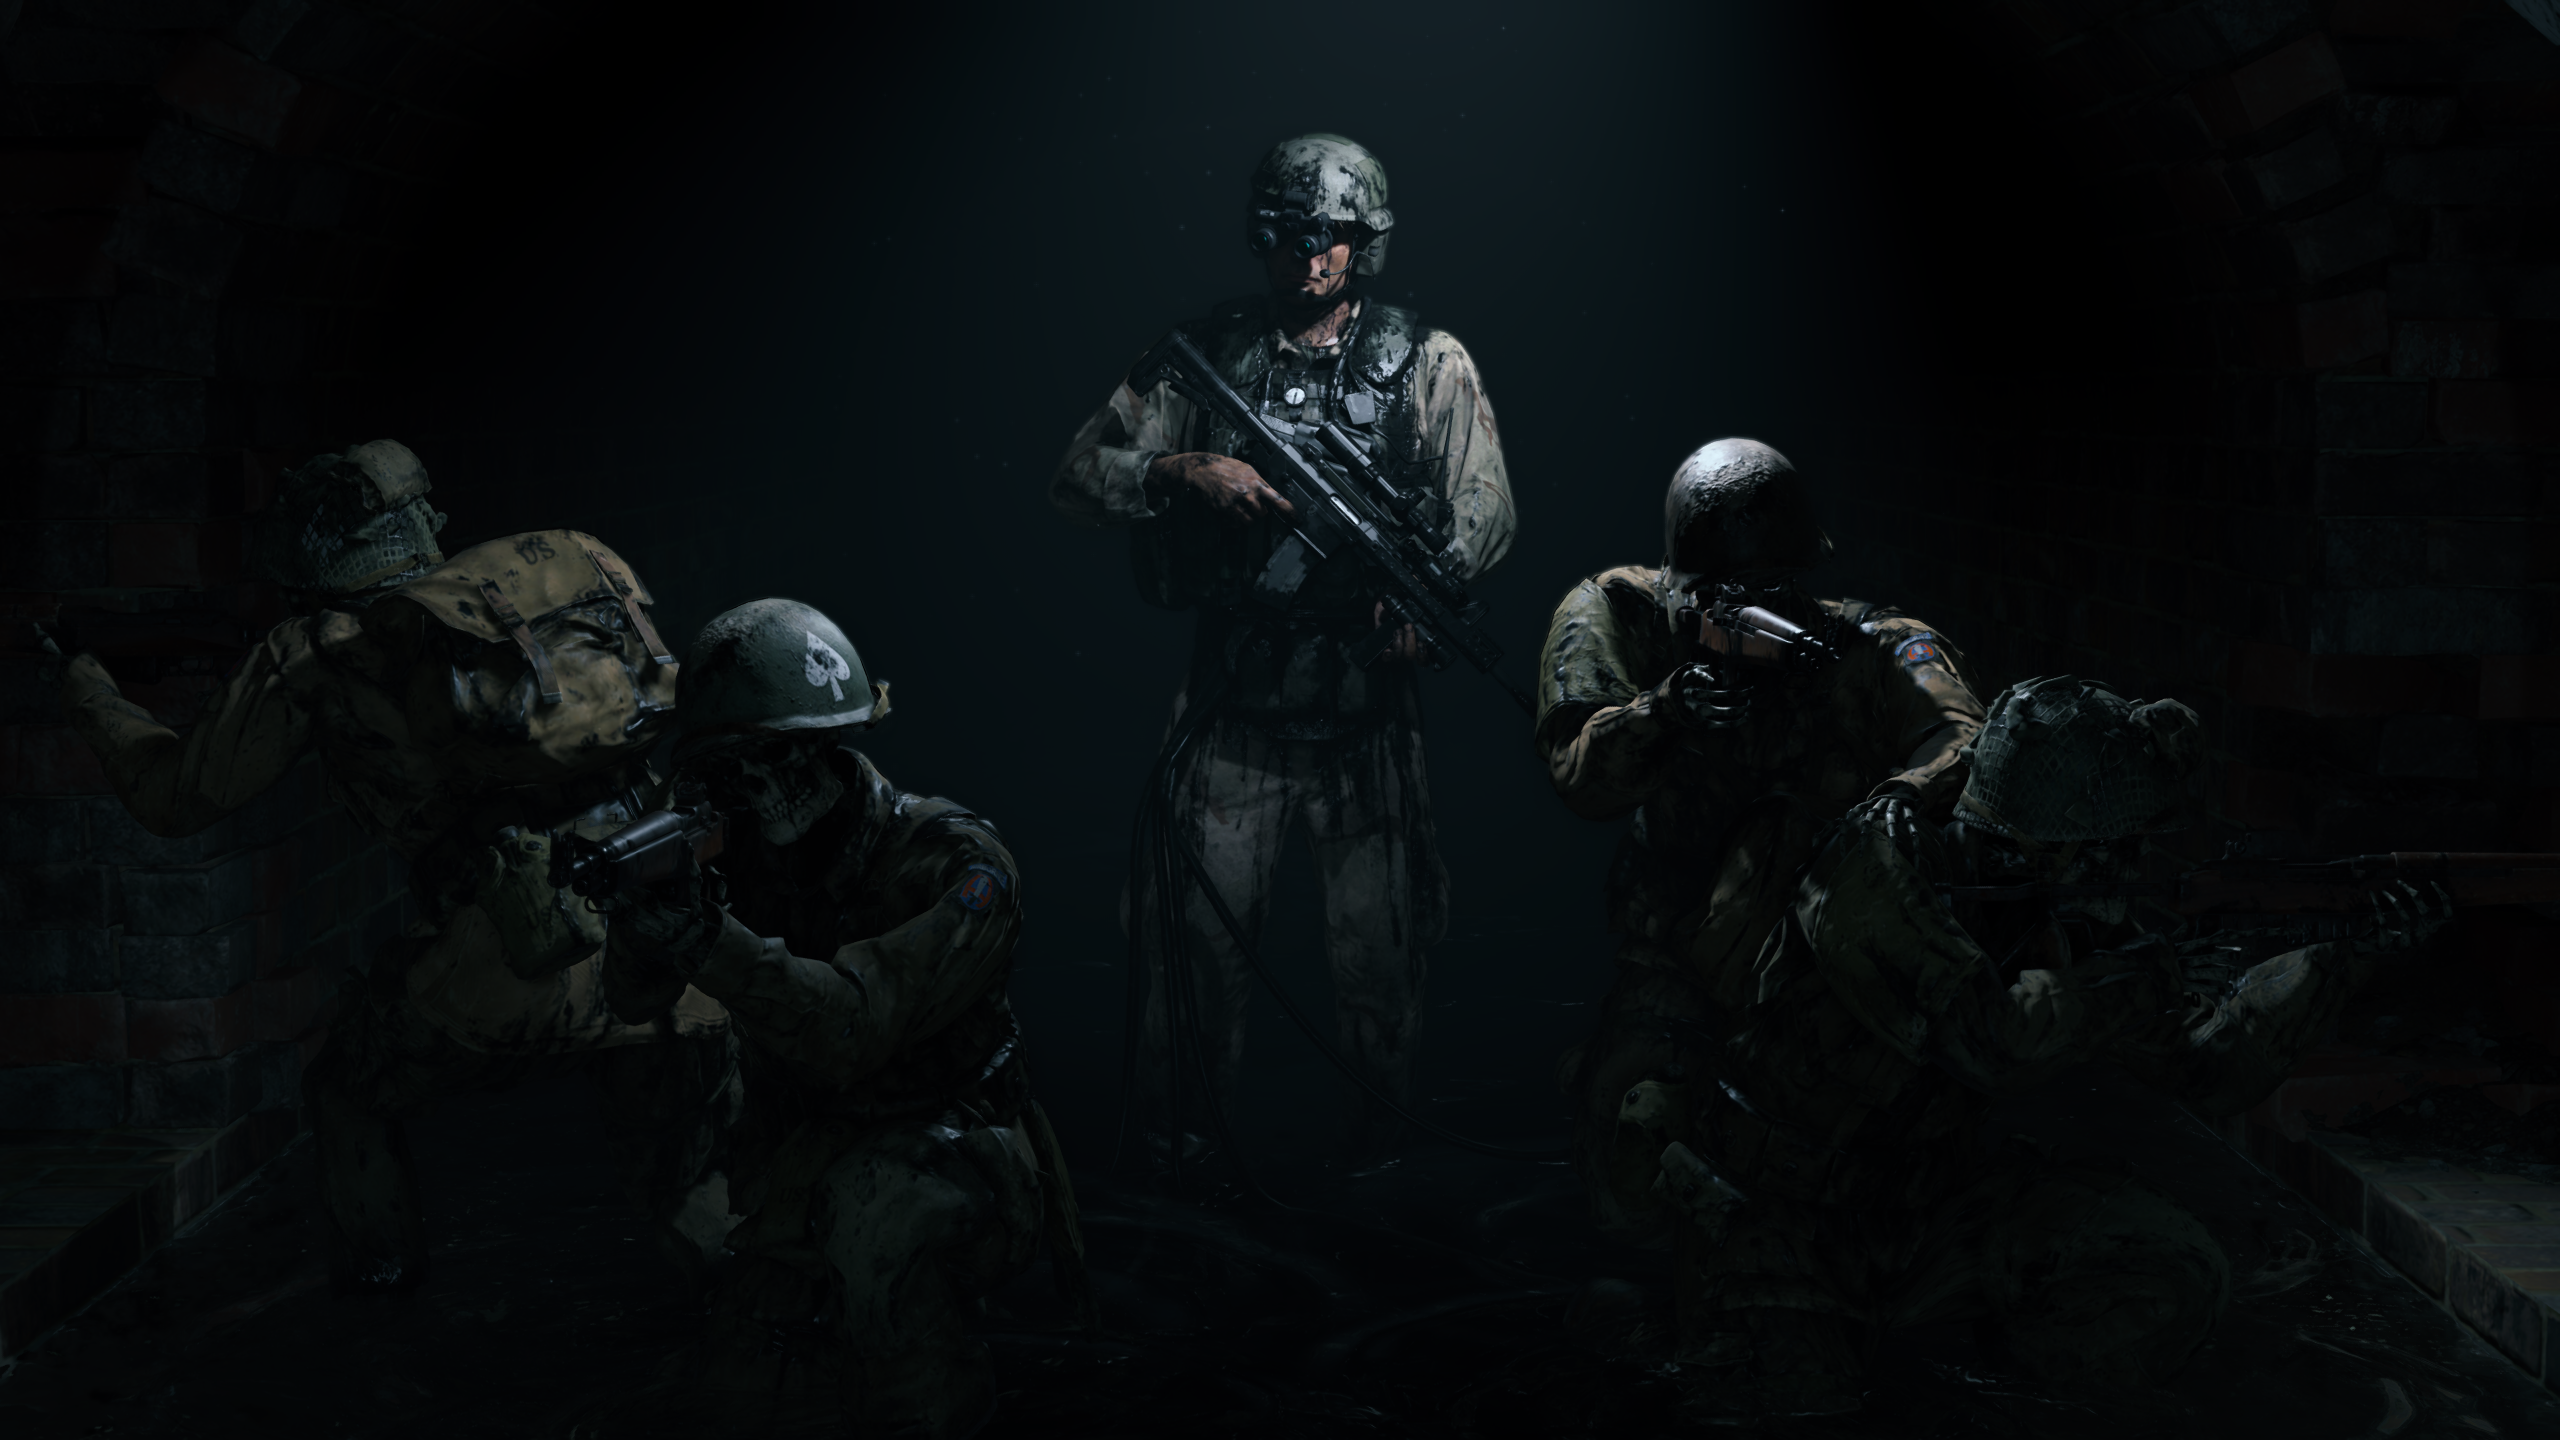 General 2560x1440 Death Stranding Director's Cut Game Gear video games video game art soldier video game characters gun standing minimalism simple background aiming dark background uniform military uniform dark boys with guns